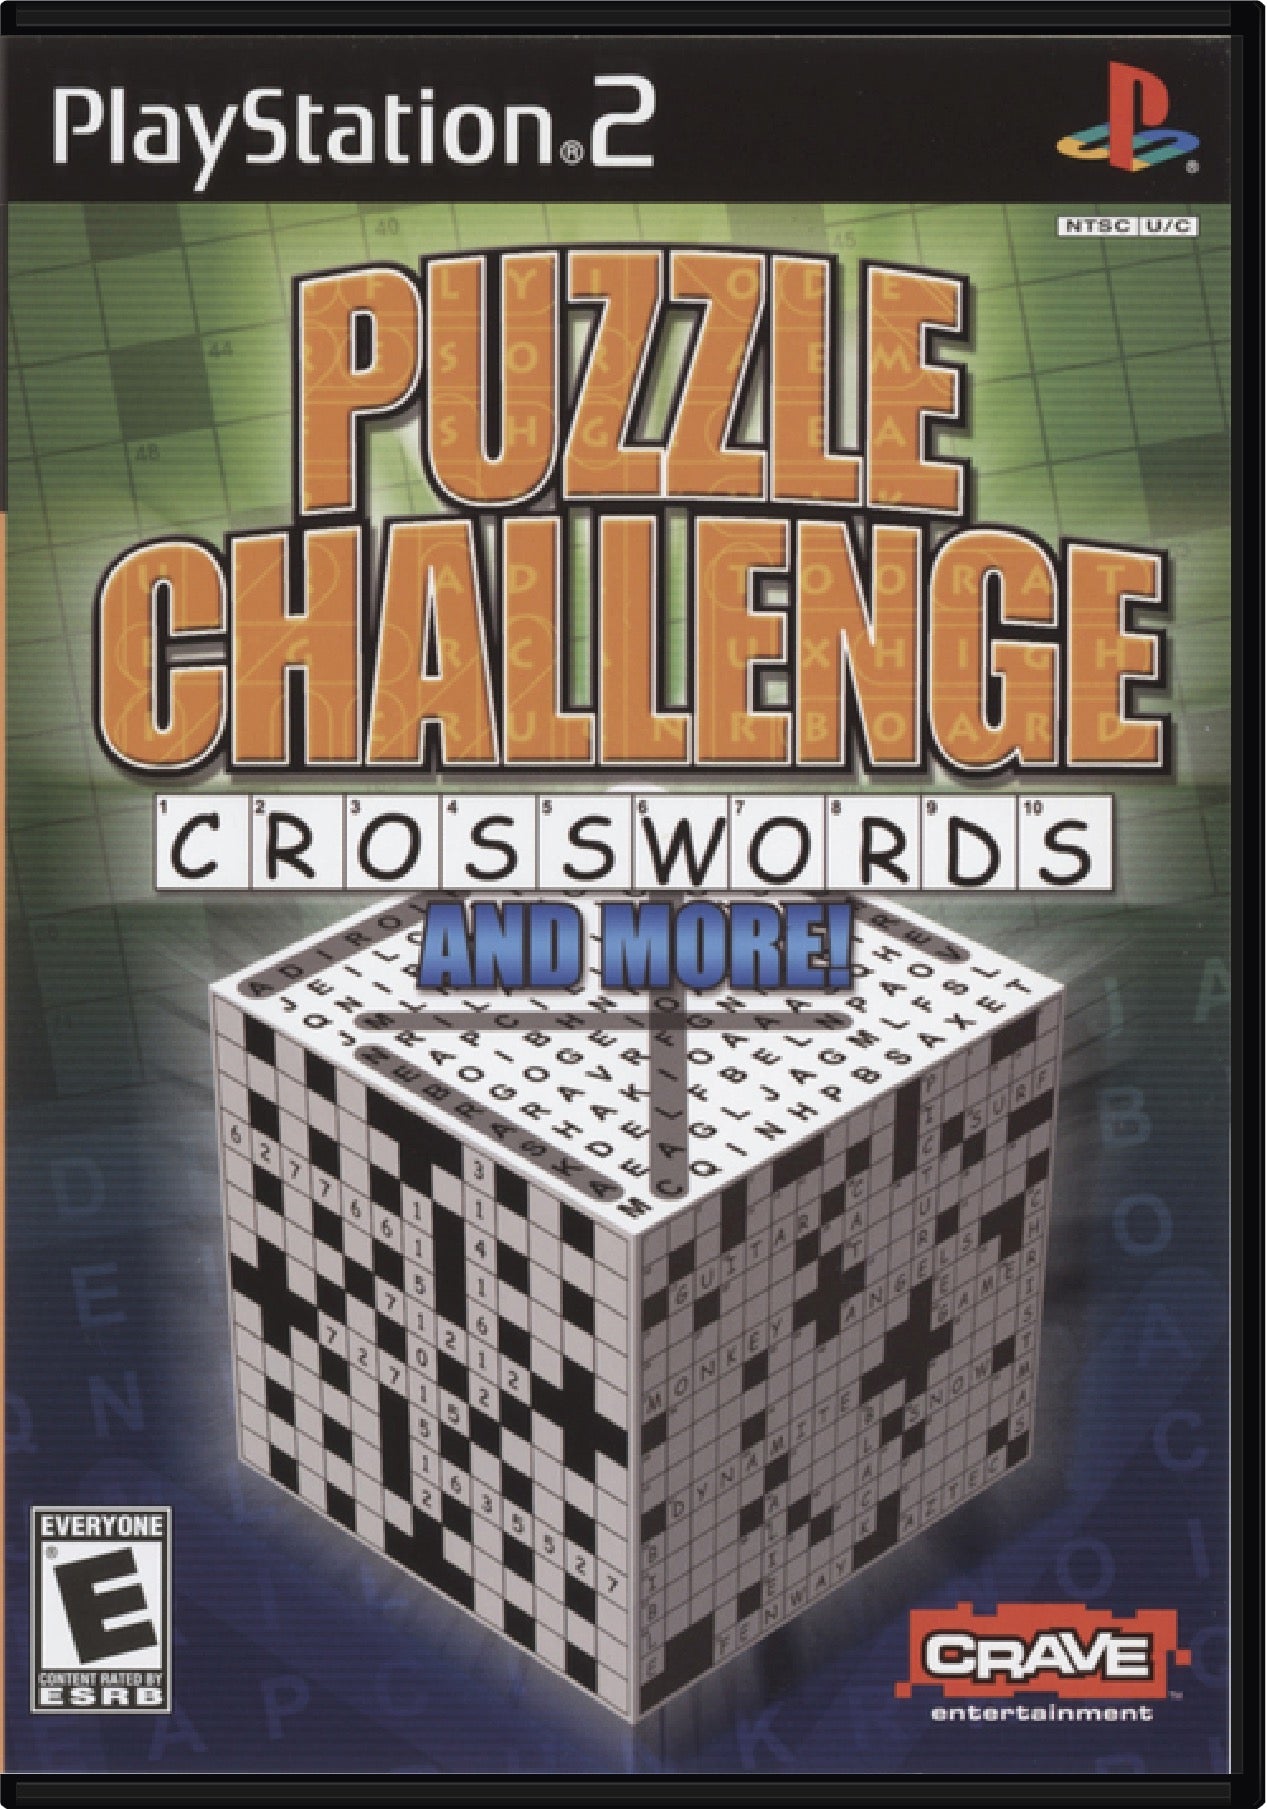 Puzzle Challenge Crosswords and More Cover Art and Product Photo